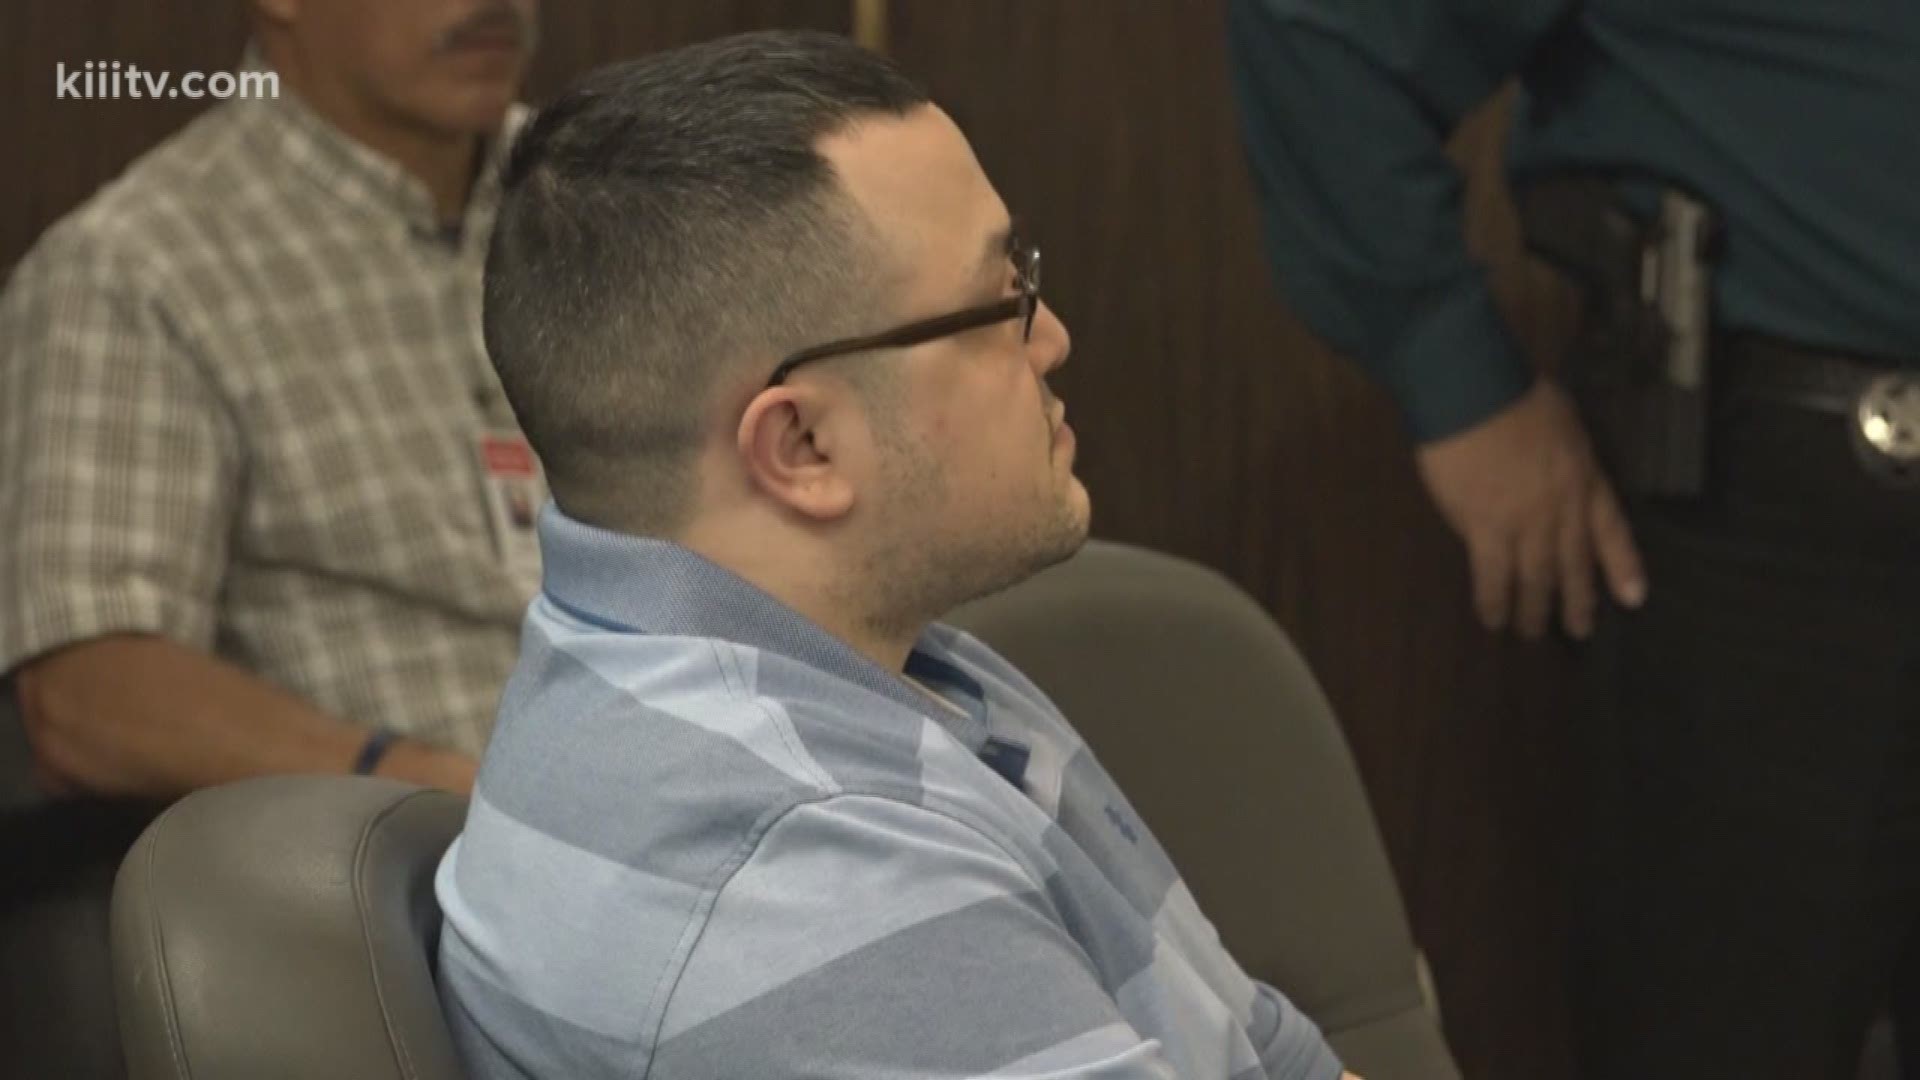 A man accused of stabbing four people and killing one during a religious service last year in Corpus Christi was found not guilty in court Tuesday by reason of insanity.